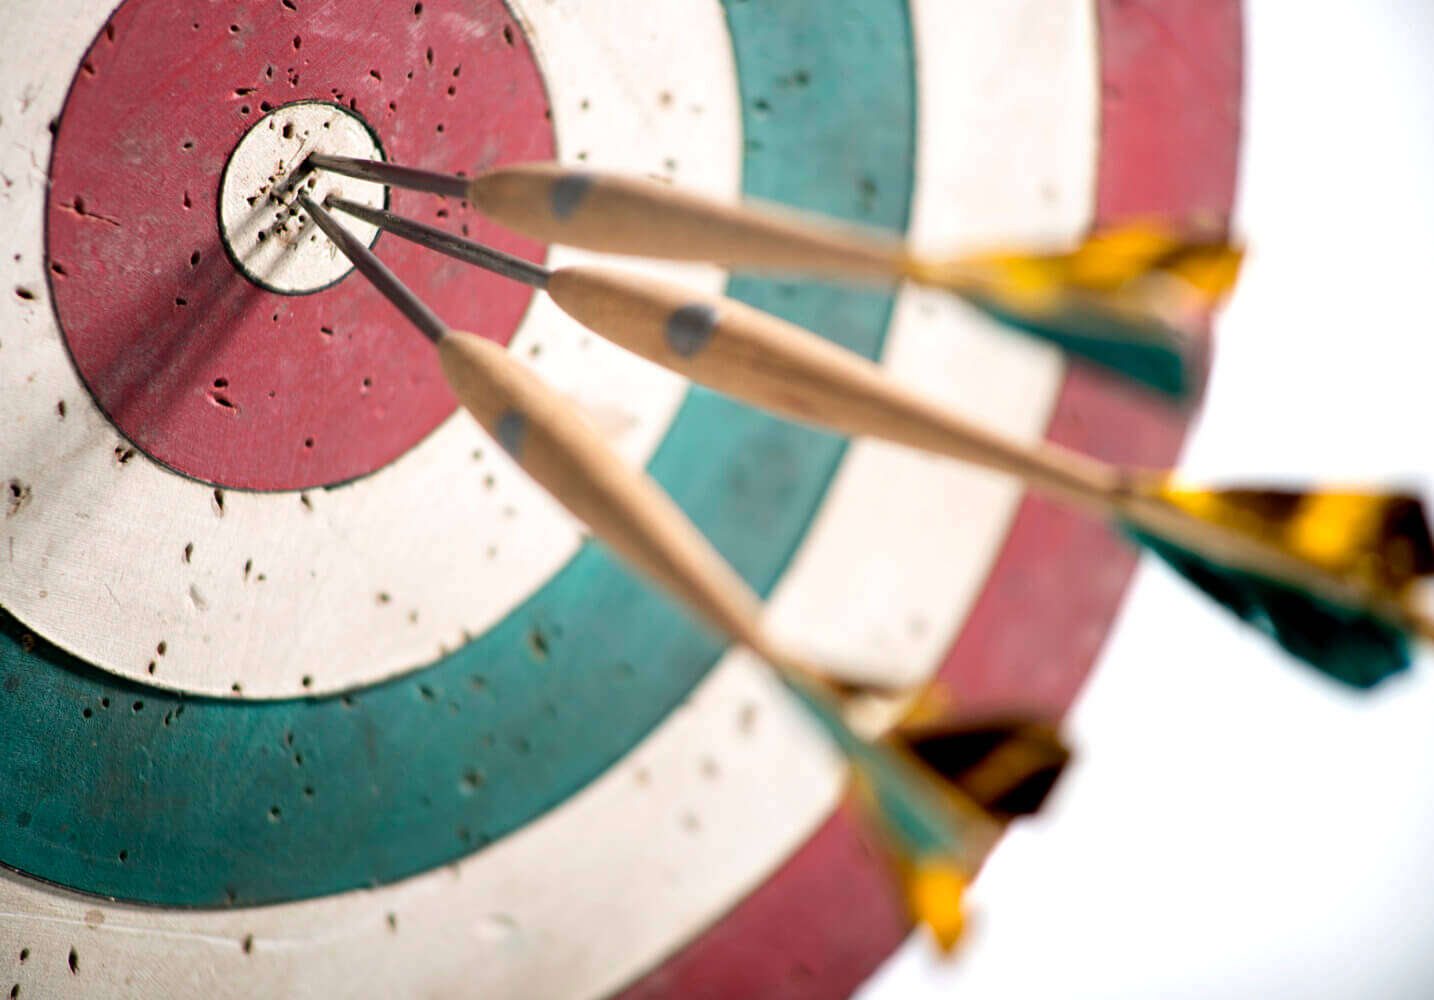 Arrows hit the bulls eye on the target just as the Fed is adjusting to bring down prices.